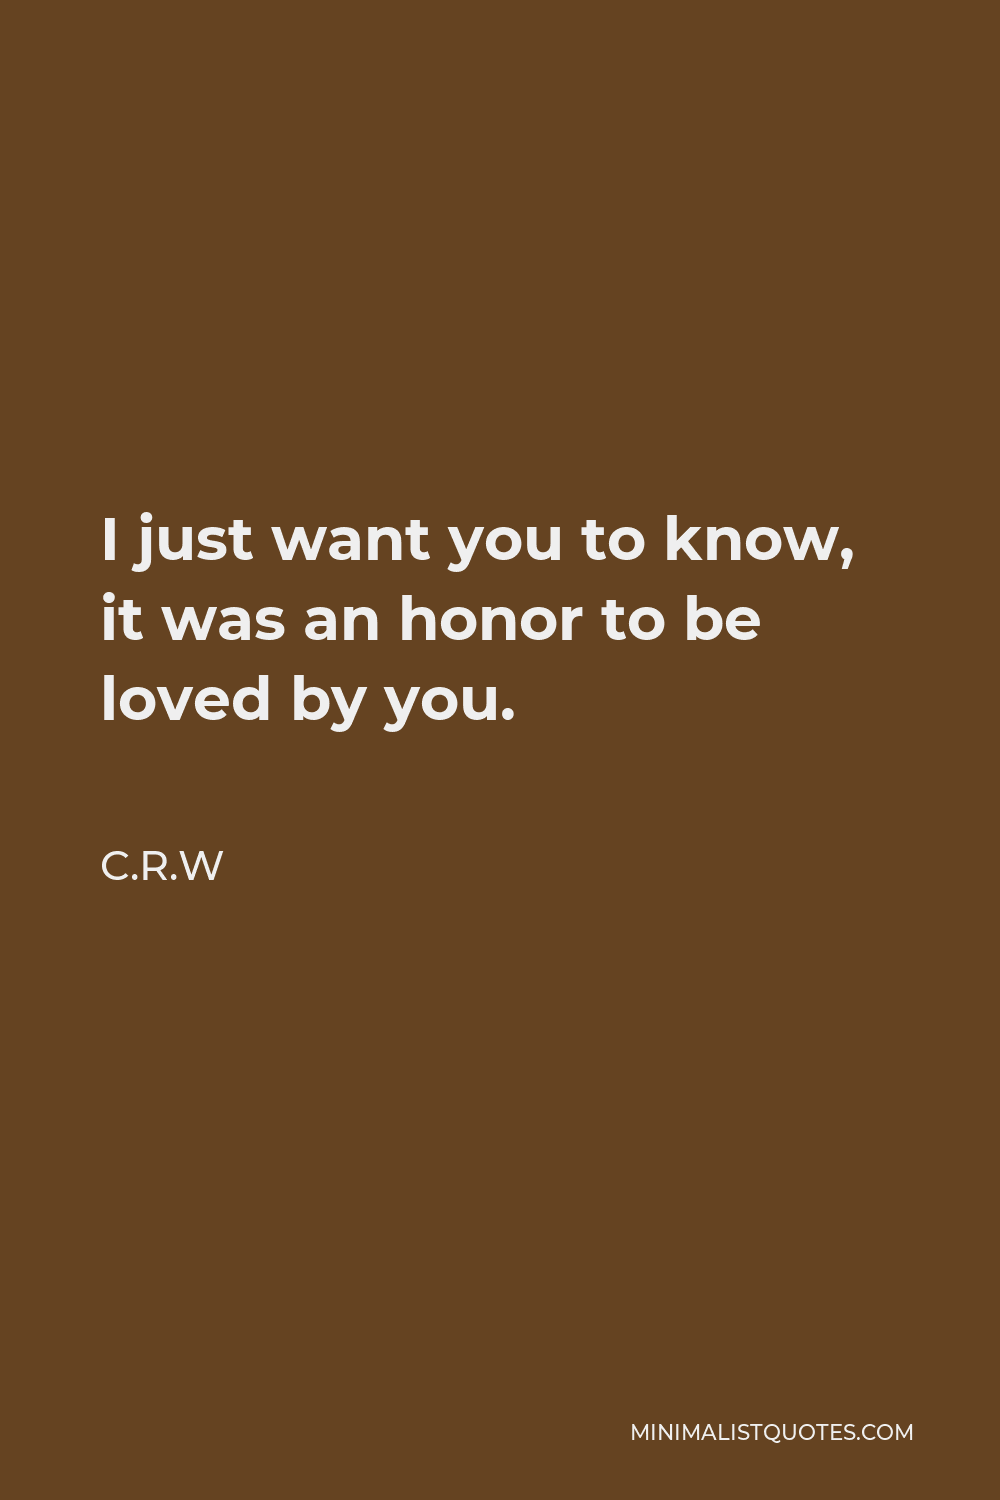 C.R.W Quote - I just want you to know, it was an honor to be loved by you.